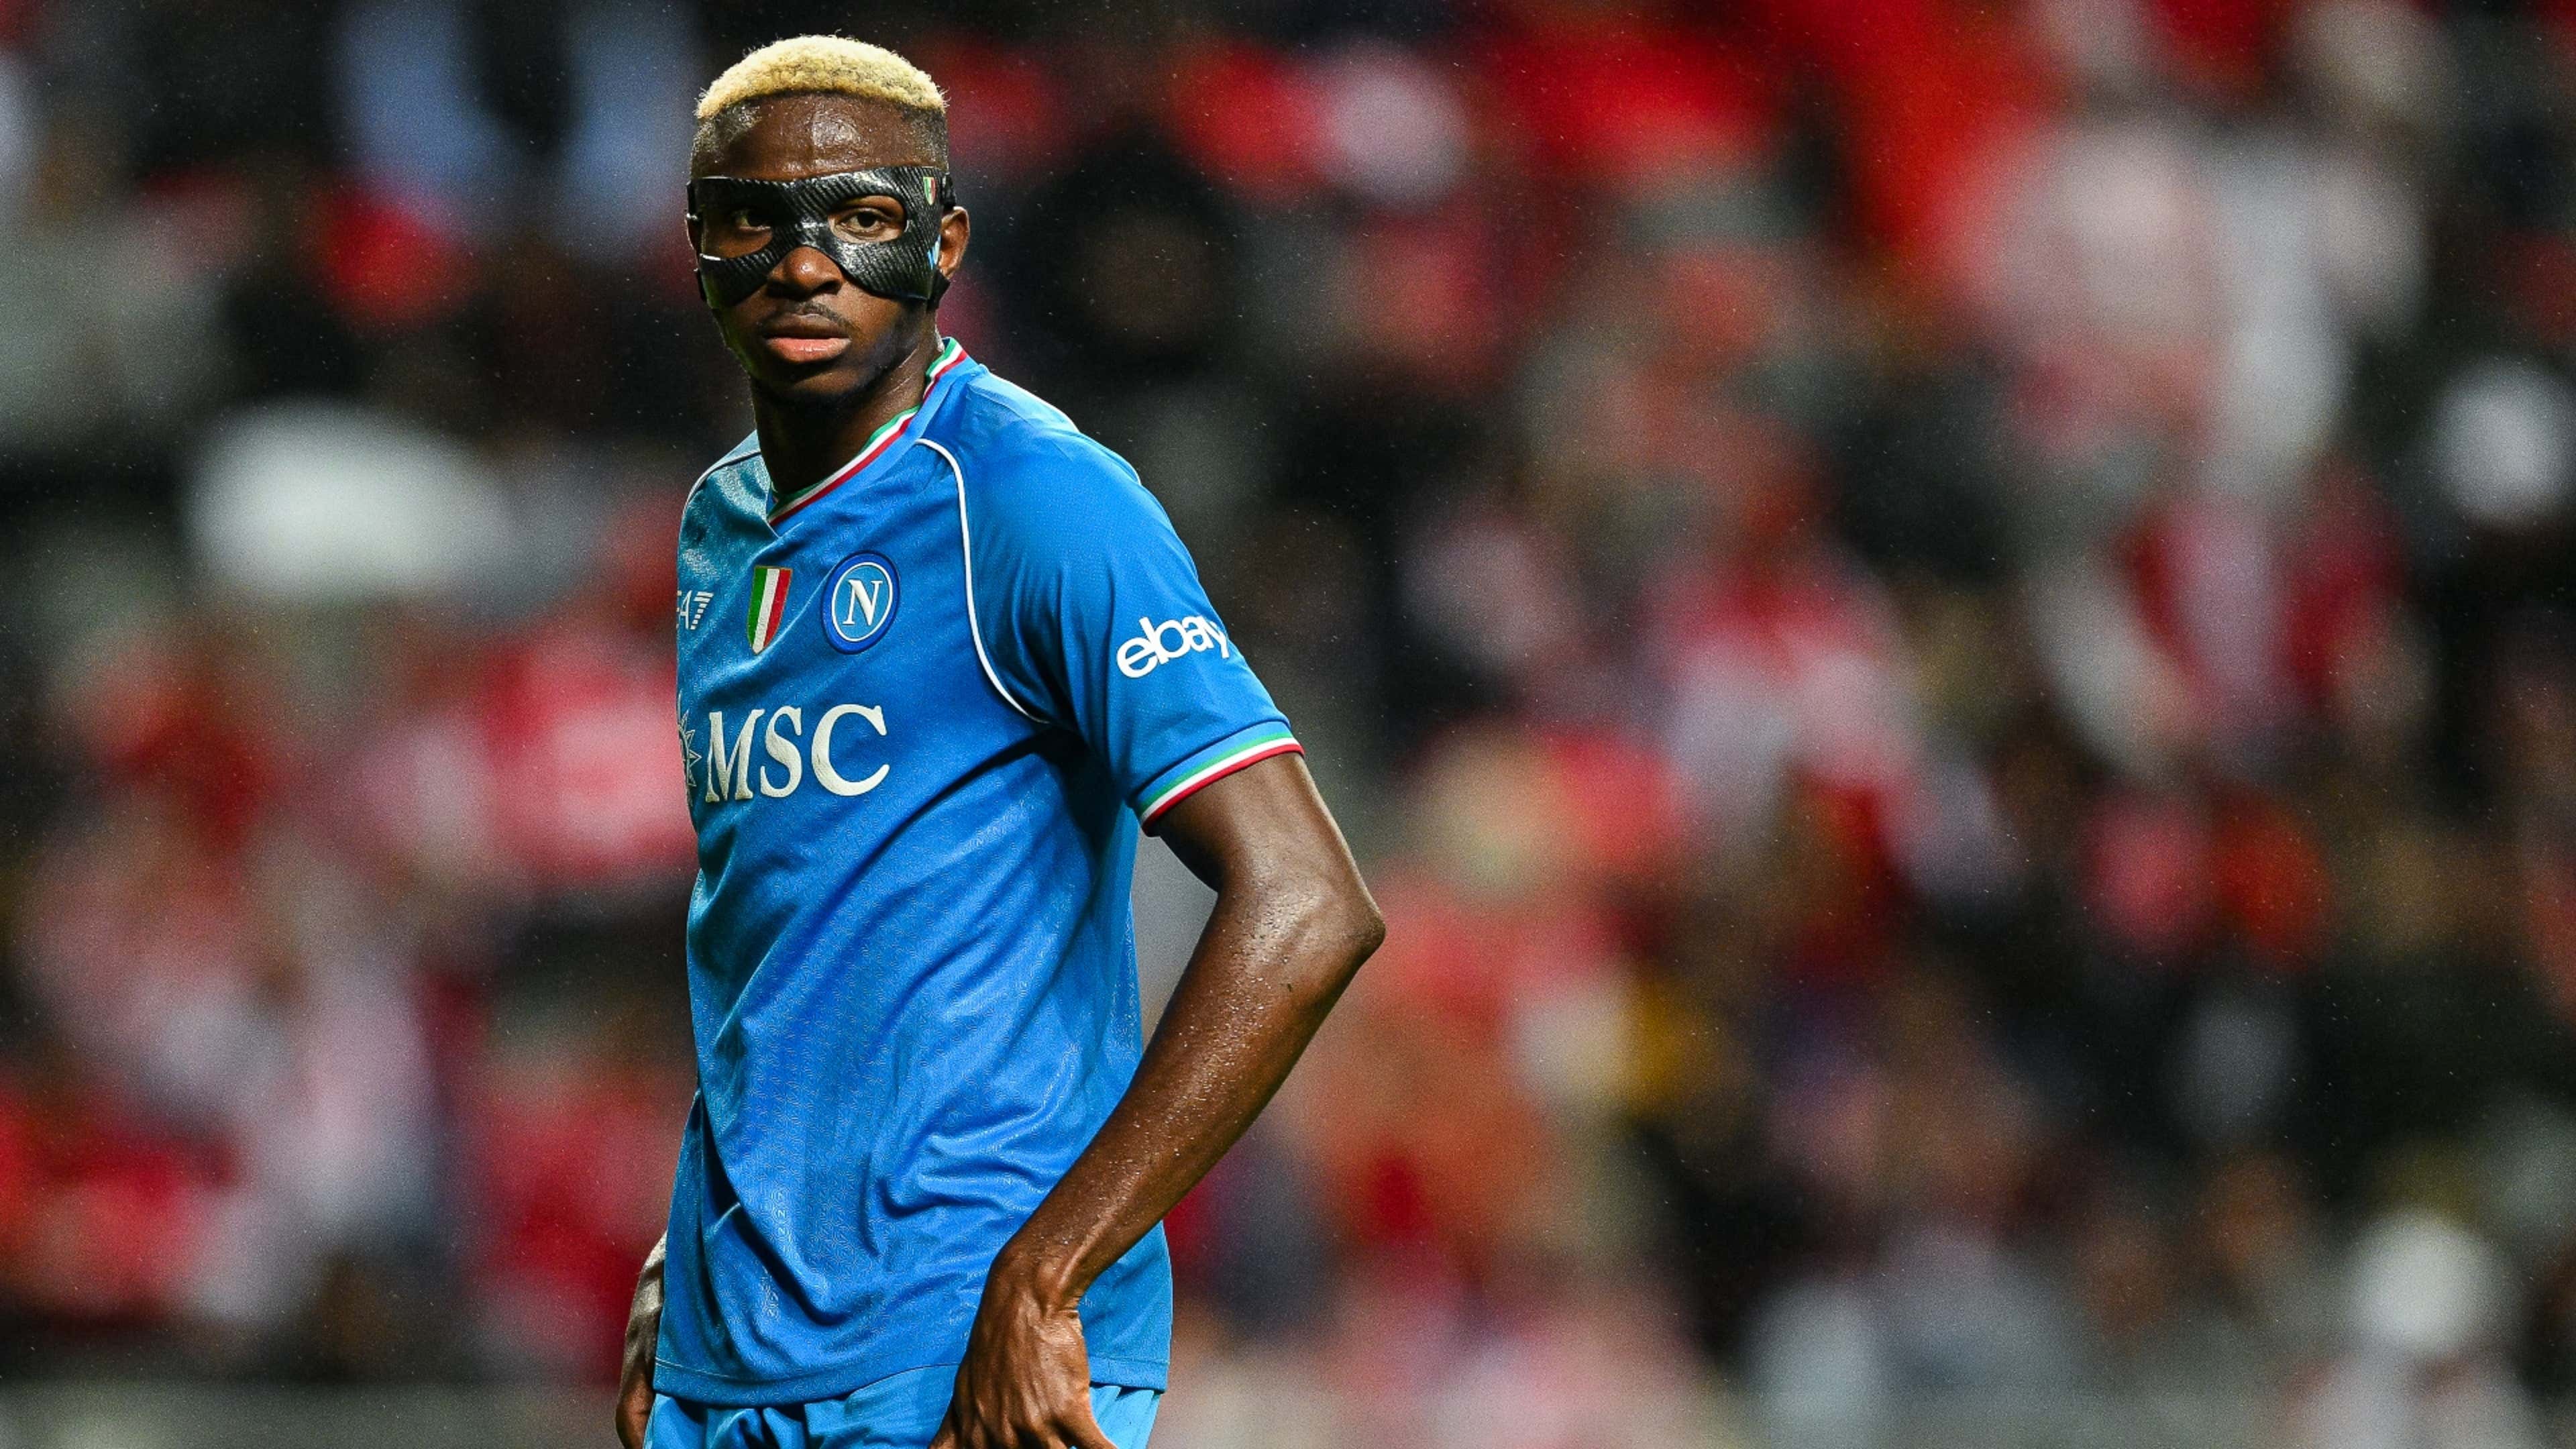  Victor Osimhen, a Nigerian professional footballer who plays as a striker for Serie A club Napoli and the Nigeria national team, wearing a black mask, looks on during a match.